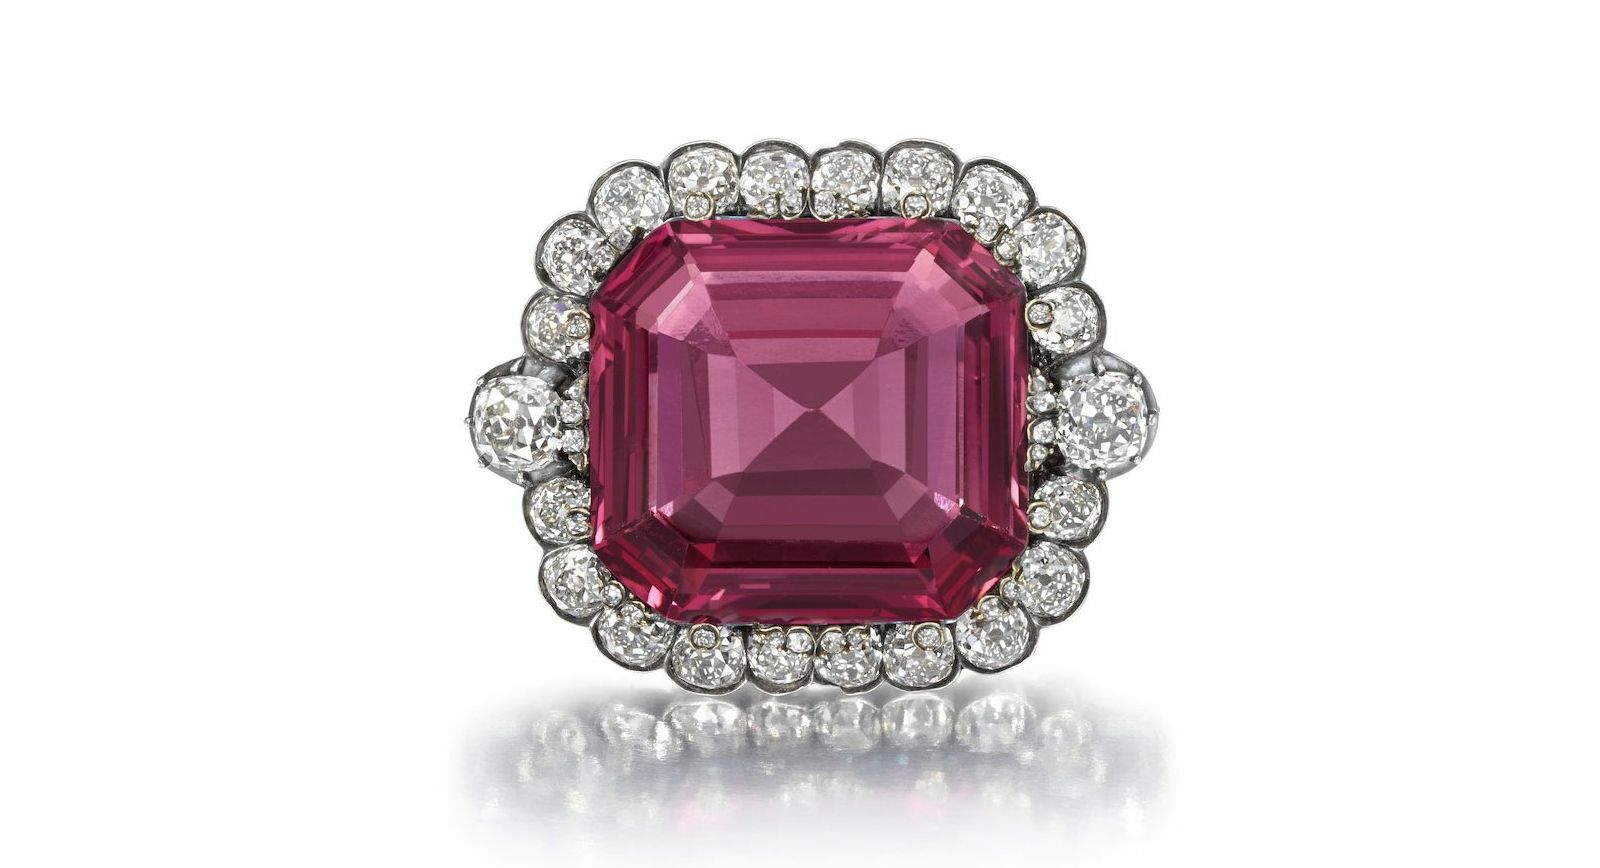 5 Remarkable Jewels Up For Auction At Bonhams On The 24th of September